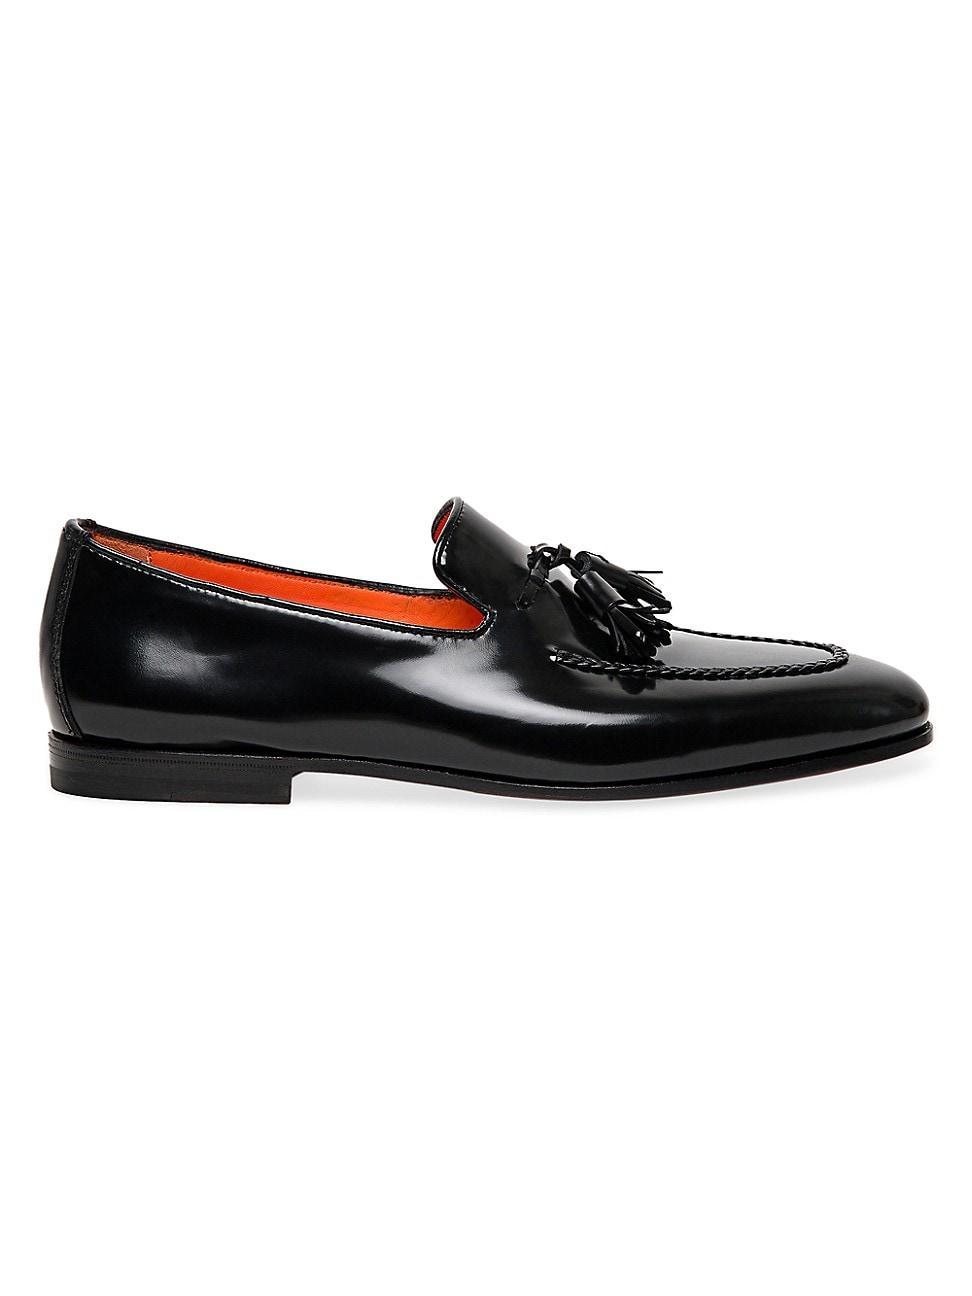 Mens Enameled Leather Tassel Loafers Product Image